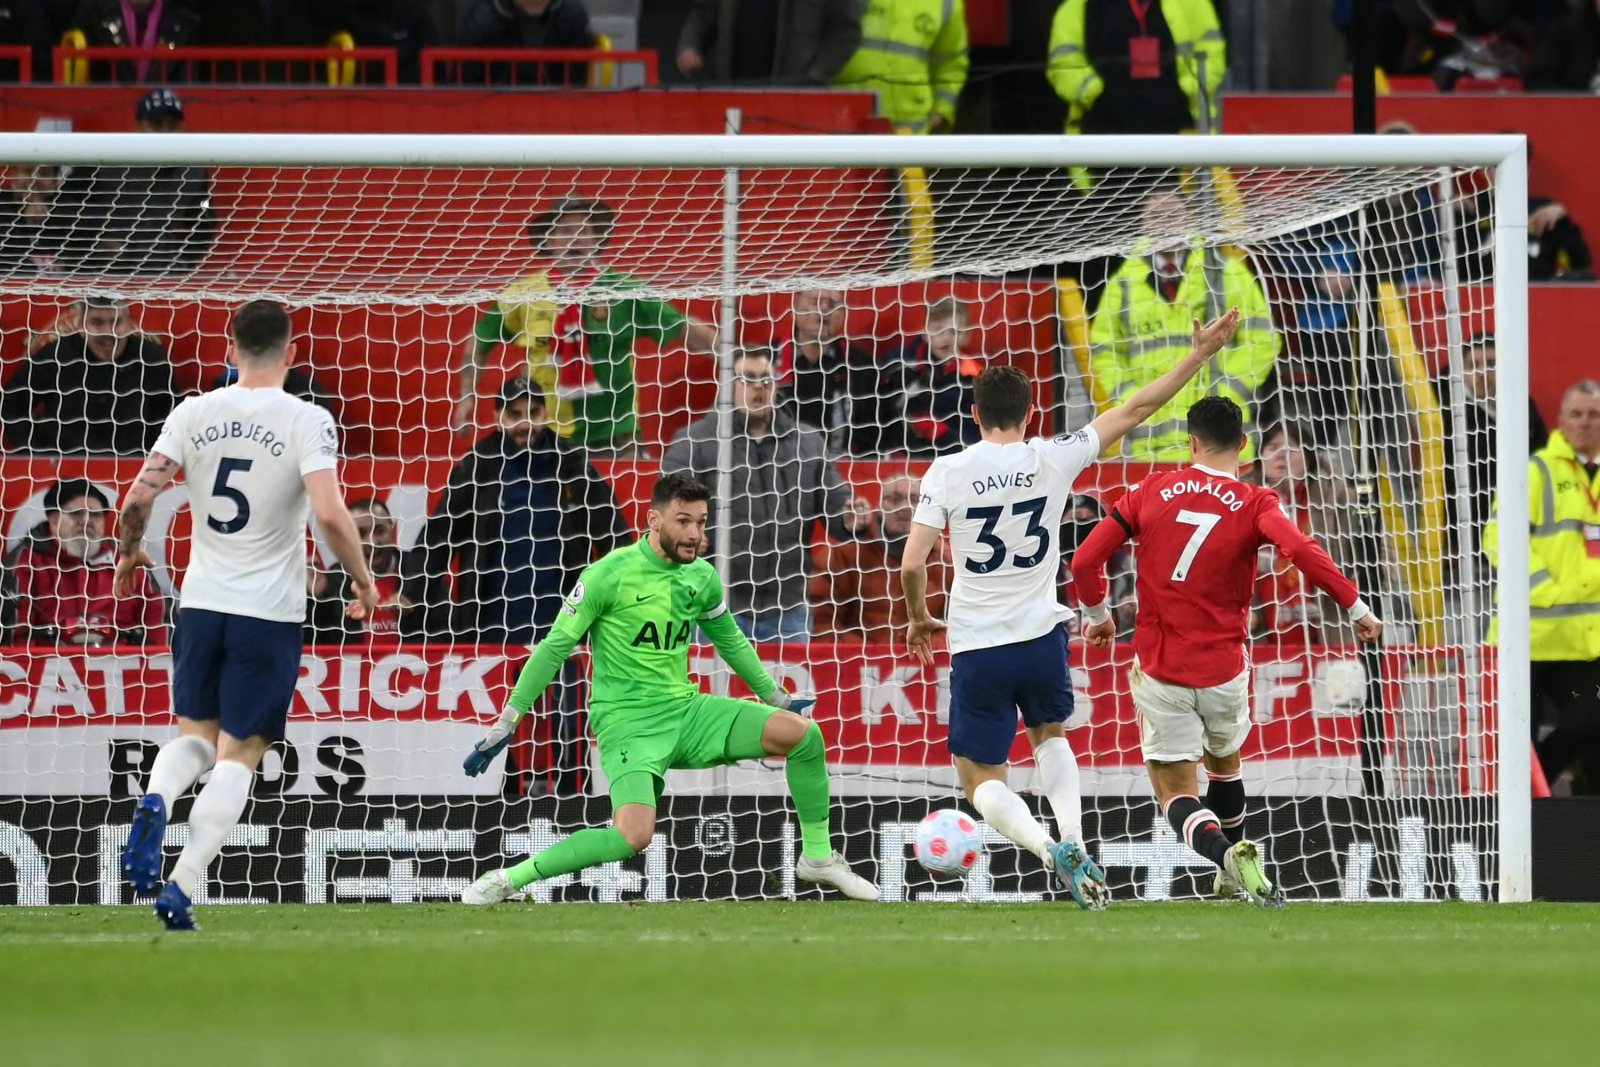 MANCHESTER, ENGLAND - MARCH 12: Cristiano Ronaldo of Manchester United scores their side's second goal during the Premier League match between Manchester United and Tottenham Hotspur at Old Trafford on March 12, 2022 in Manchester, England. (Photo by Michael Regan/Getty Images)